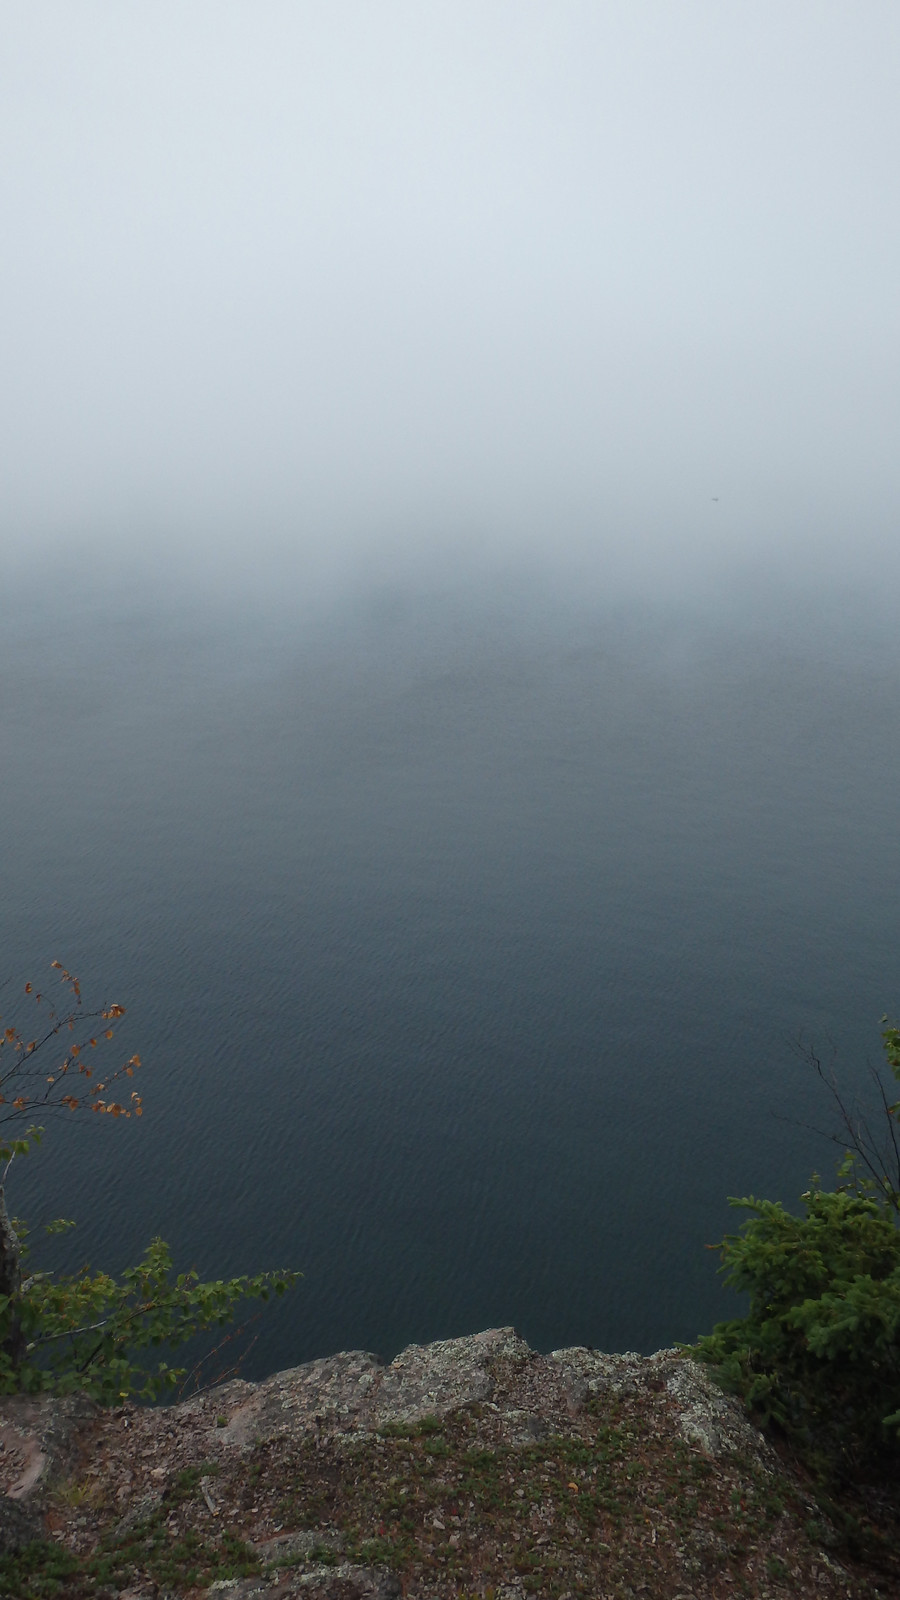 looking out at the lake at Shovel Point, with the lake meeting the fog